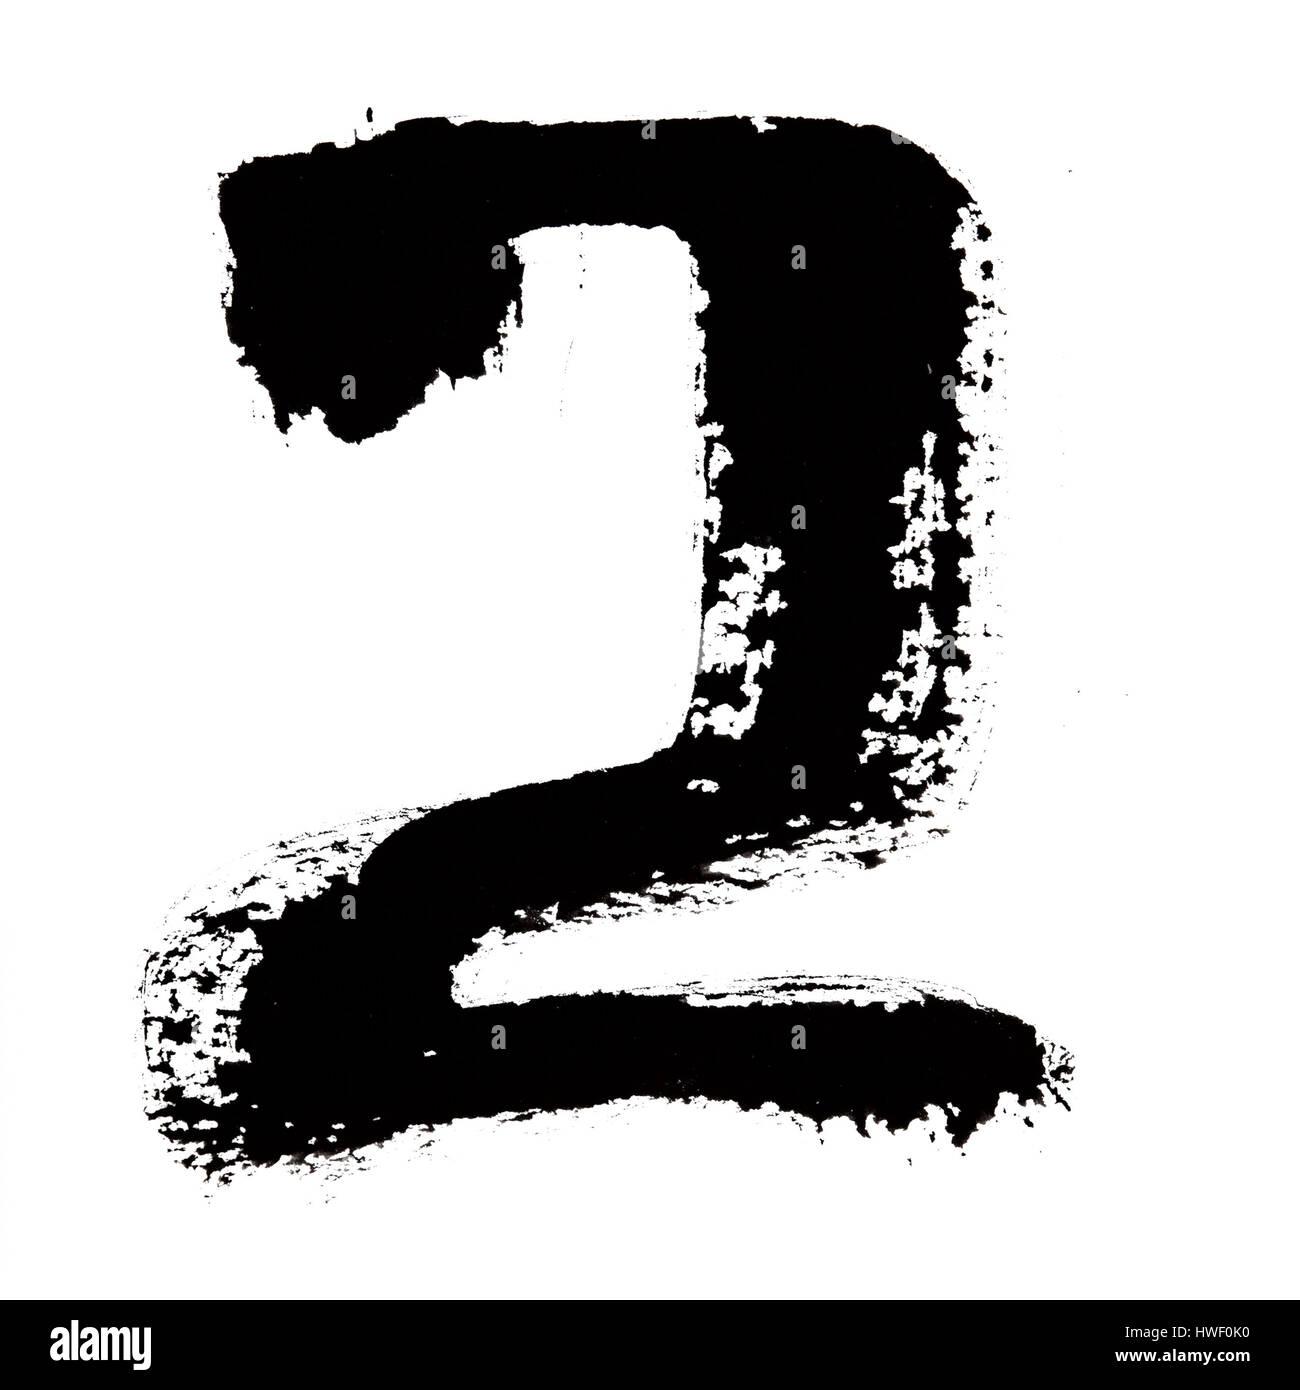 2 - Black ink numbers over the white background Stock Photo